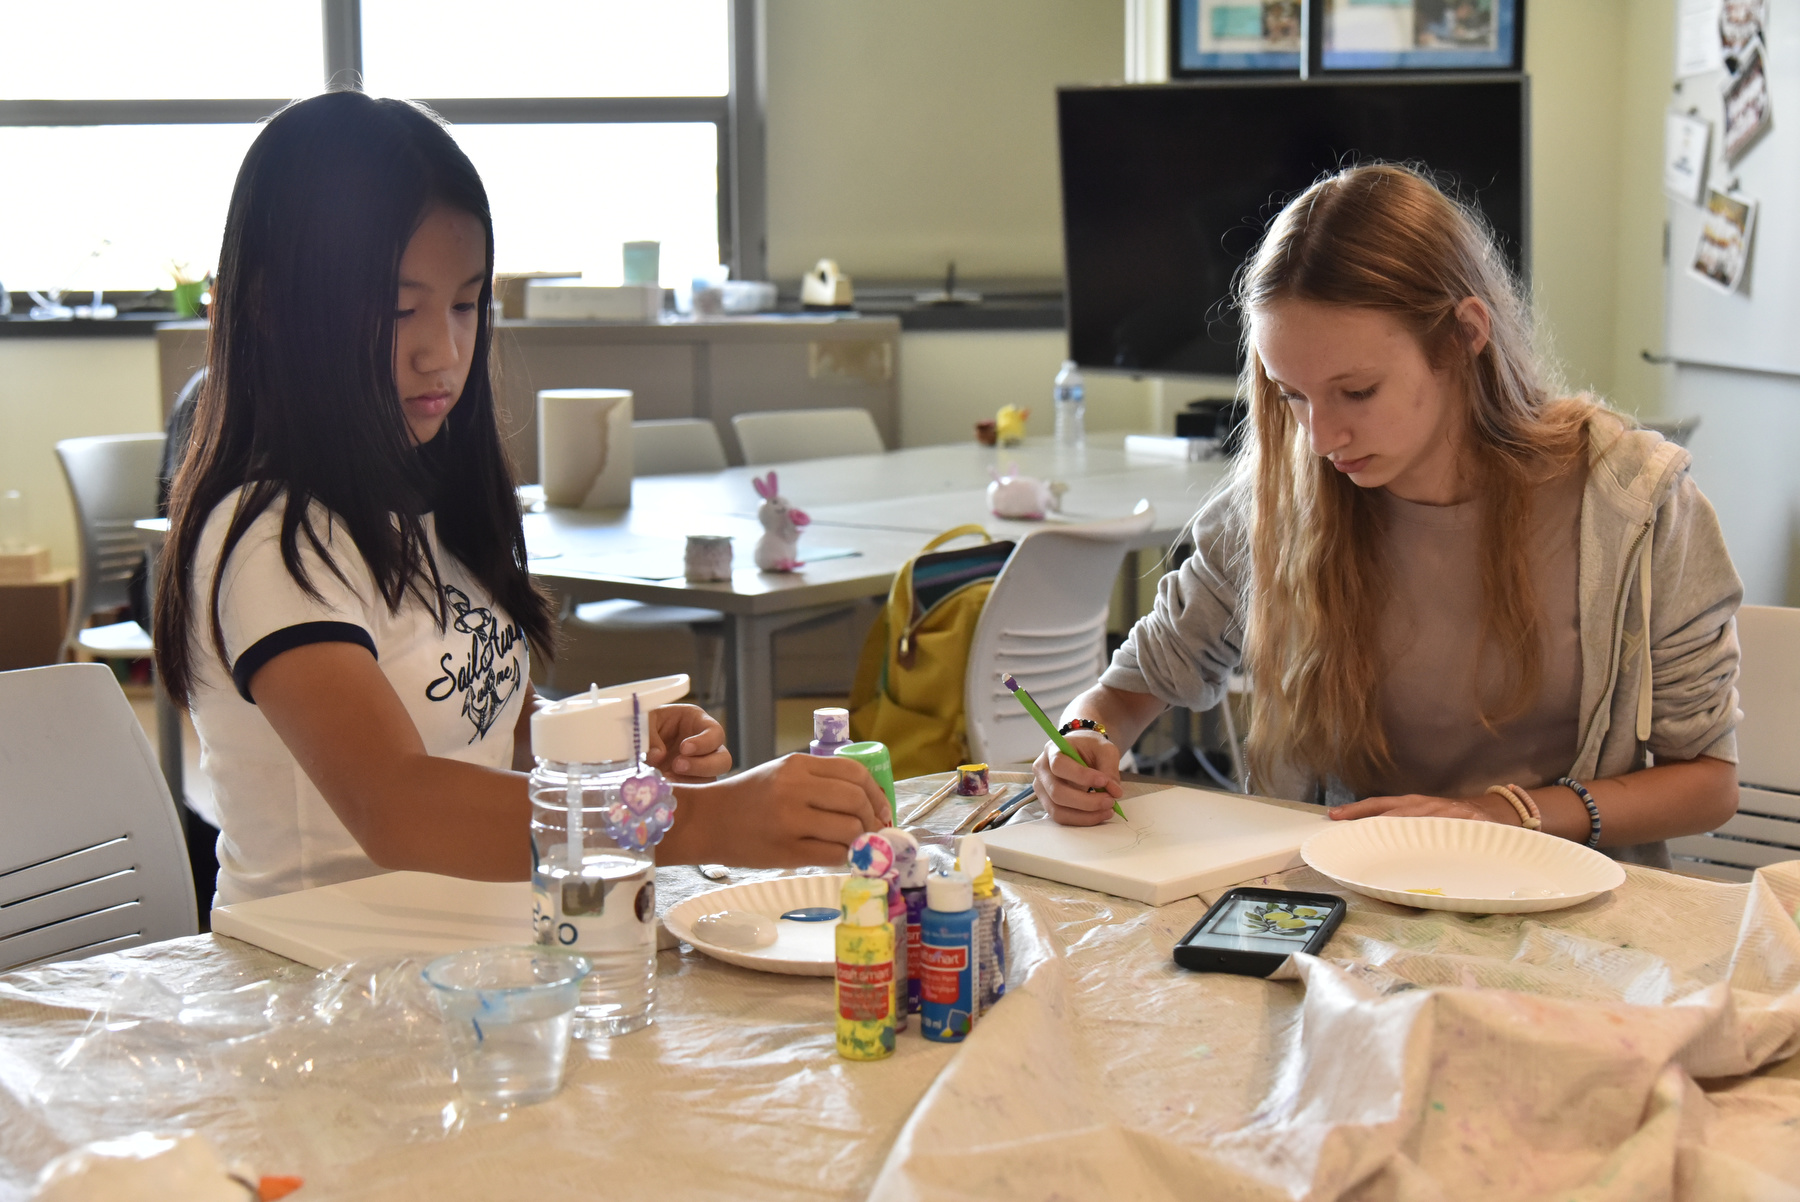 The Sheldon Institute for Barbara Shineman Scholars program featured a variety of opportunities for students to express their creativity and form new connections, including art painting classes in Park Hall.